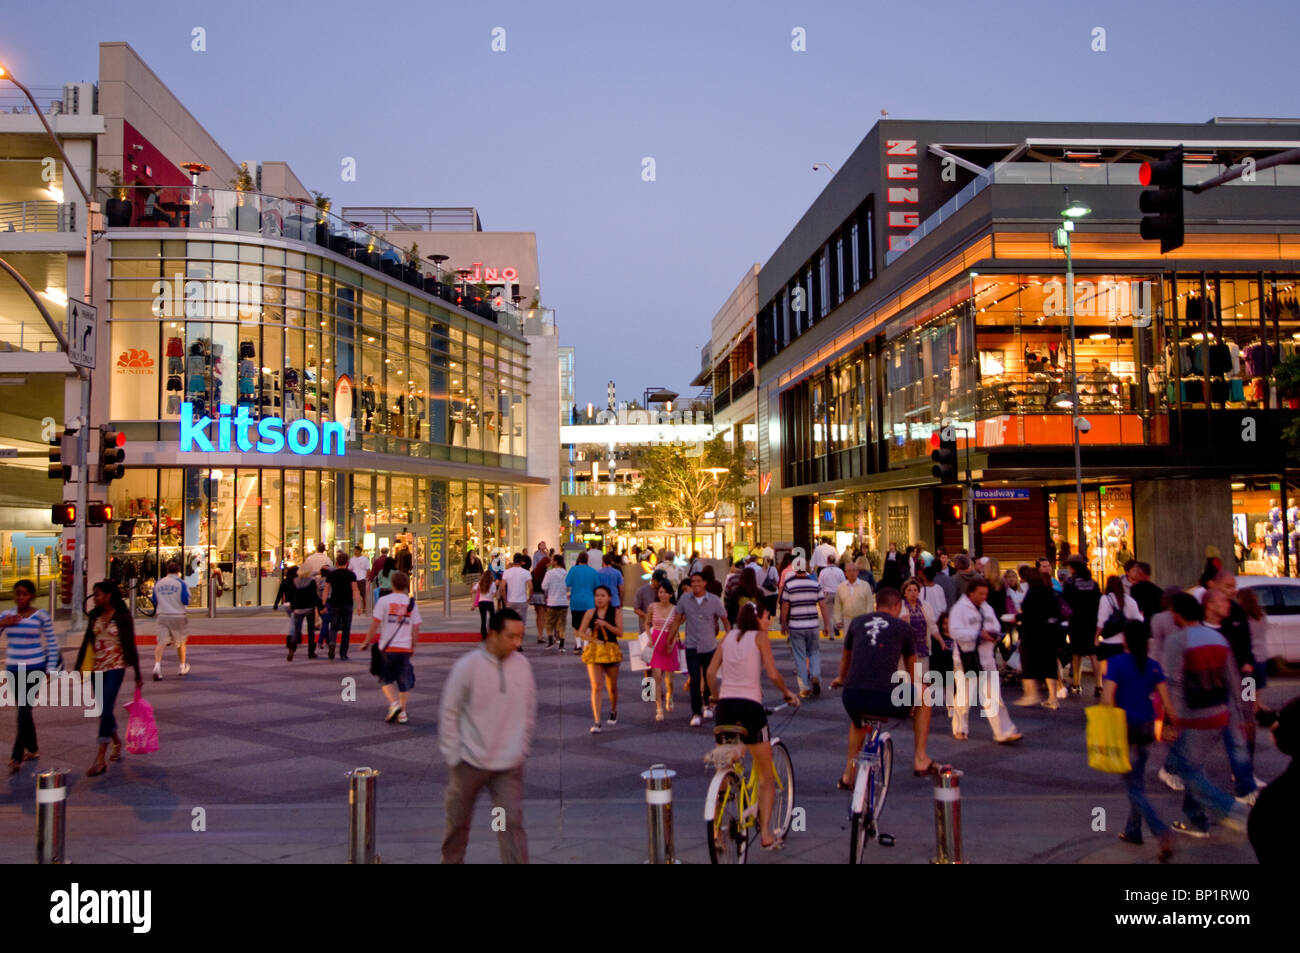 Santa Monica Place, LEED Gold Certified Open-Air Shopping Plaza